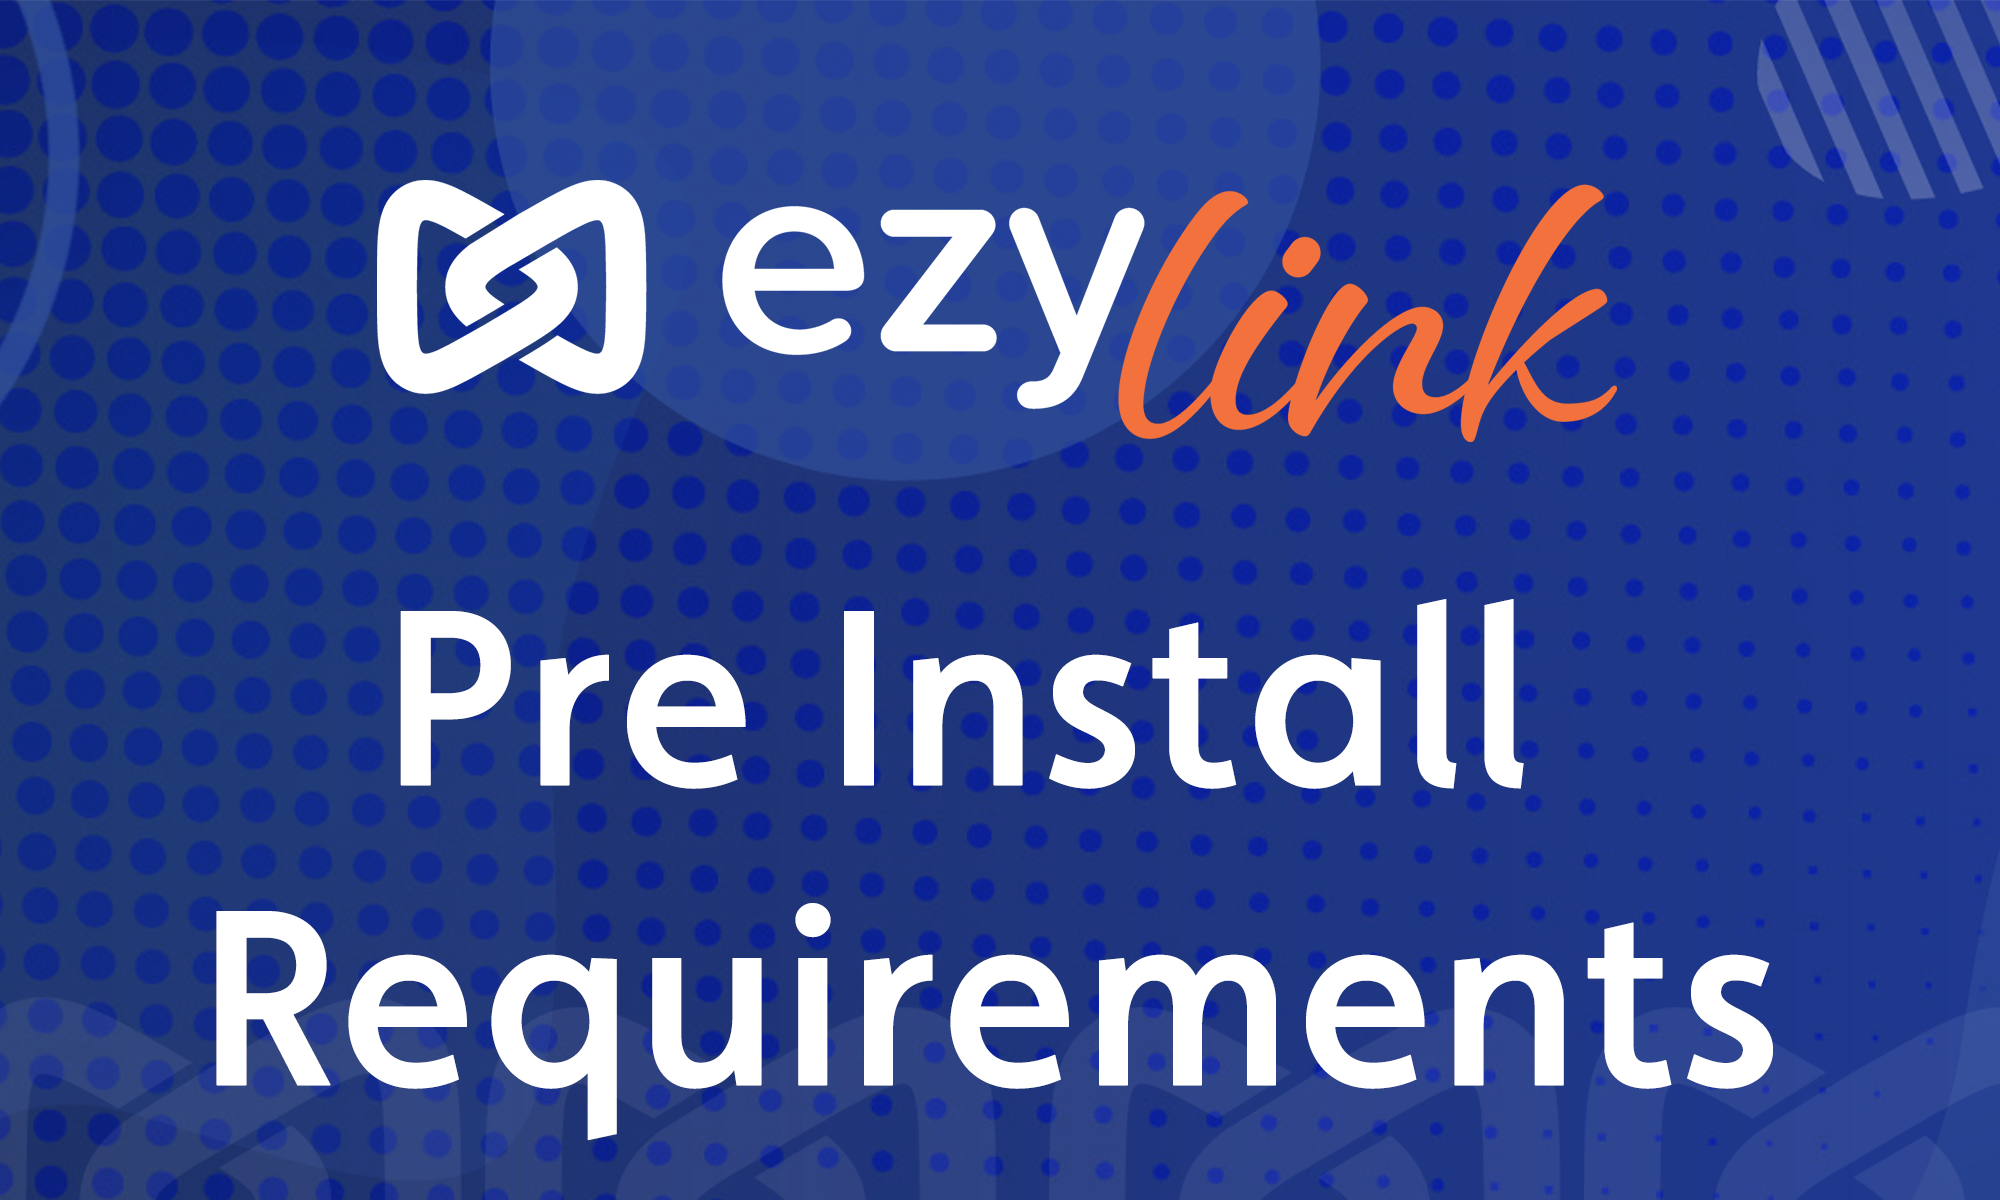 Featured image for “What information does Ezylink require before installation?”